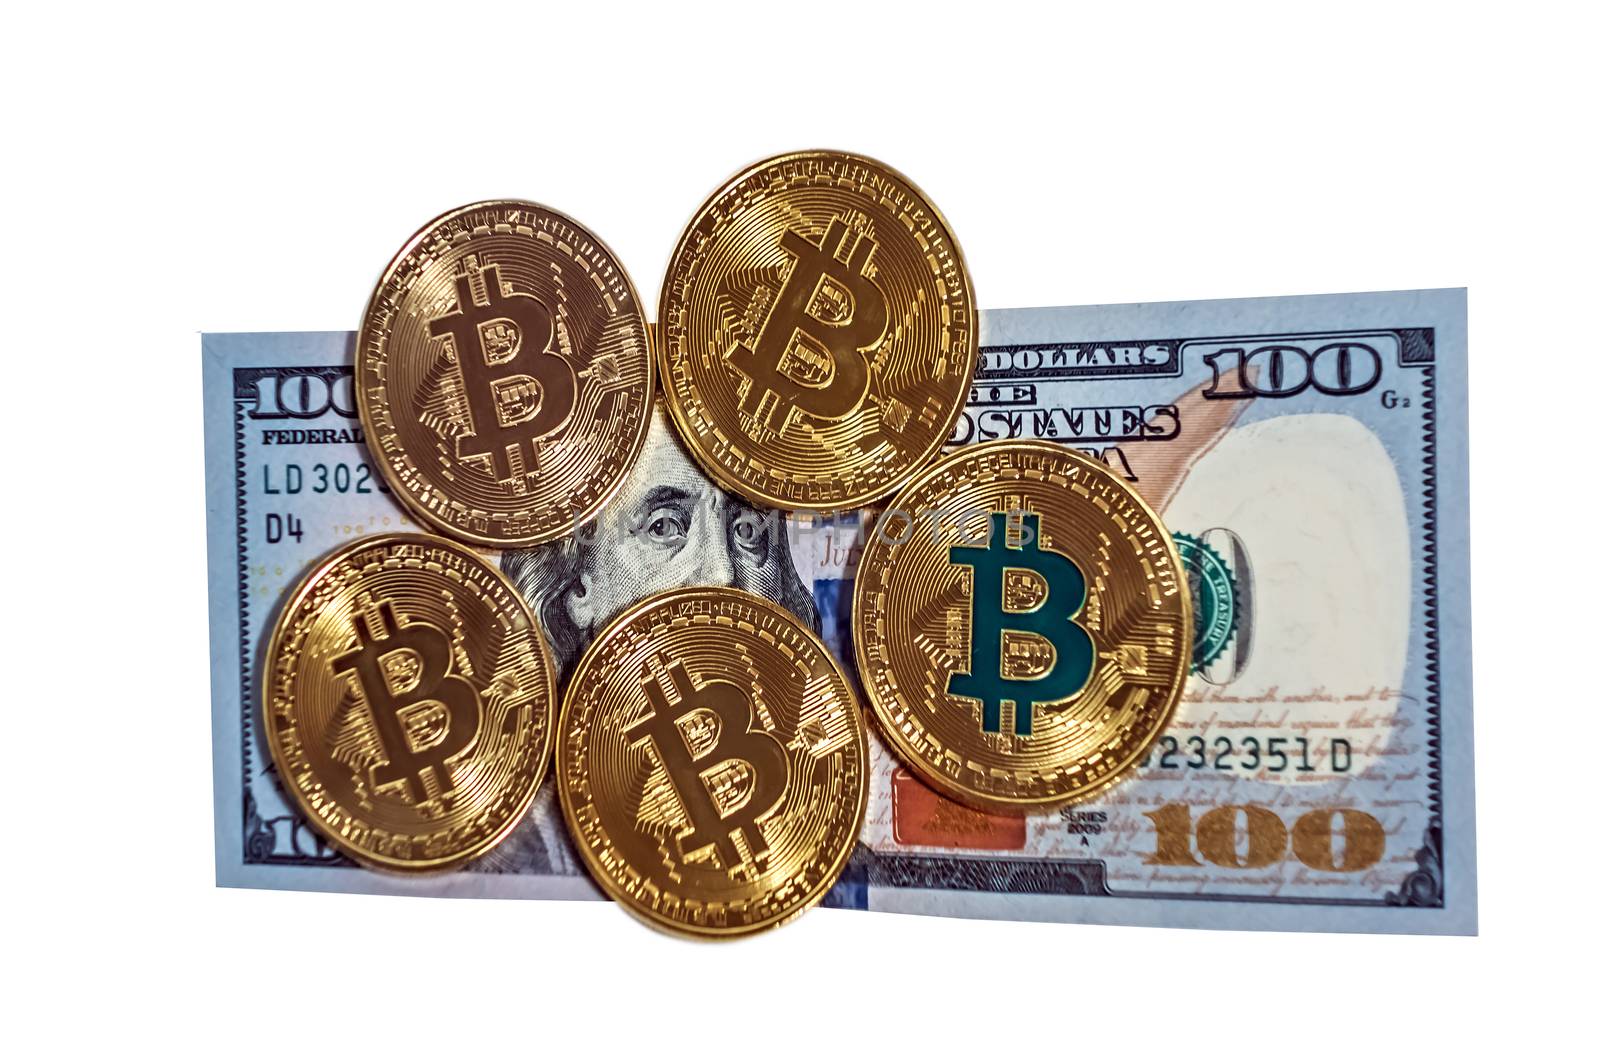 Gold bitcoin coin one hundred dollars bills. Coin flower exchange usd isolated on white background, Macro portrait of Benjamin Franklin cryptocurrency mining concept.